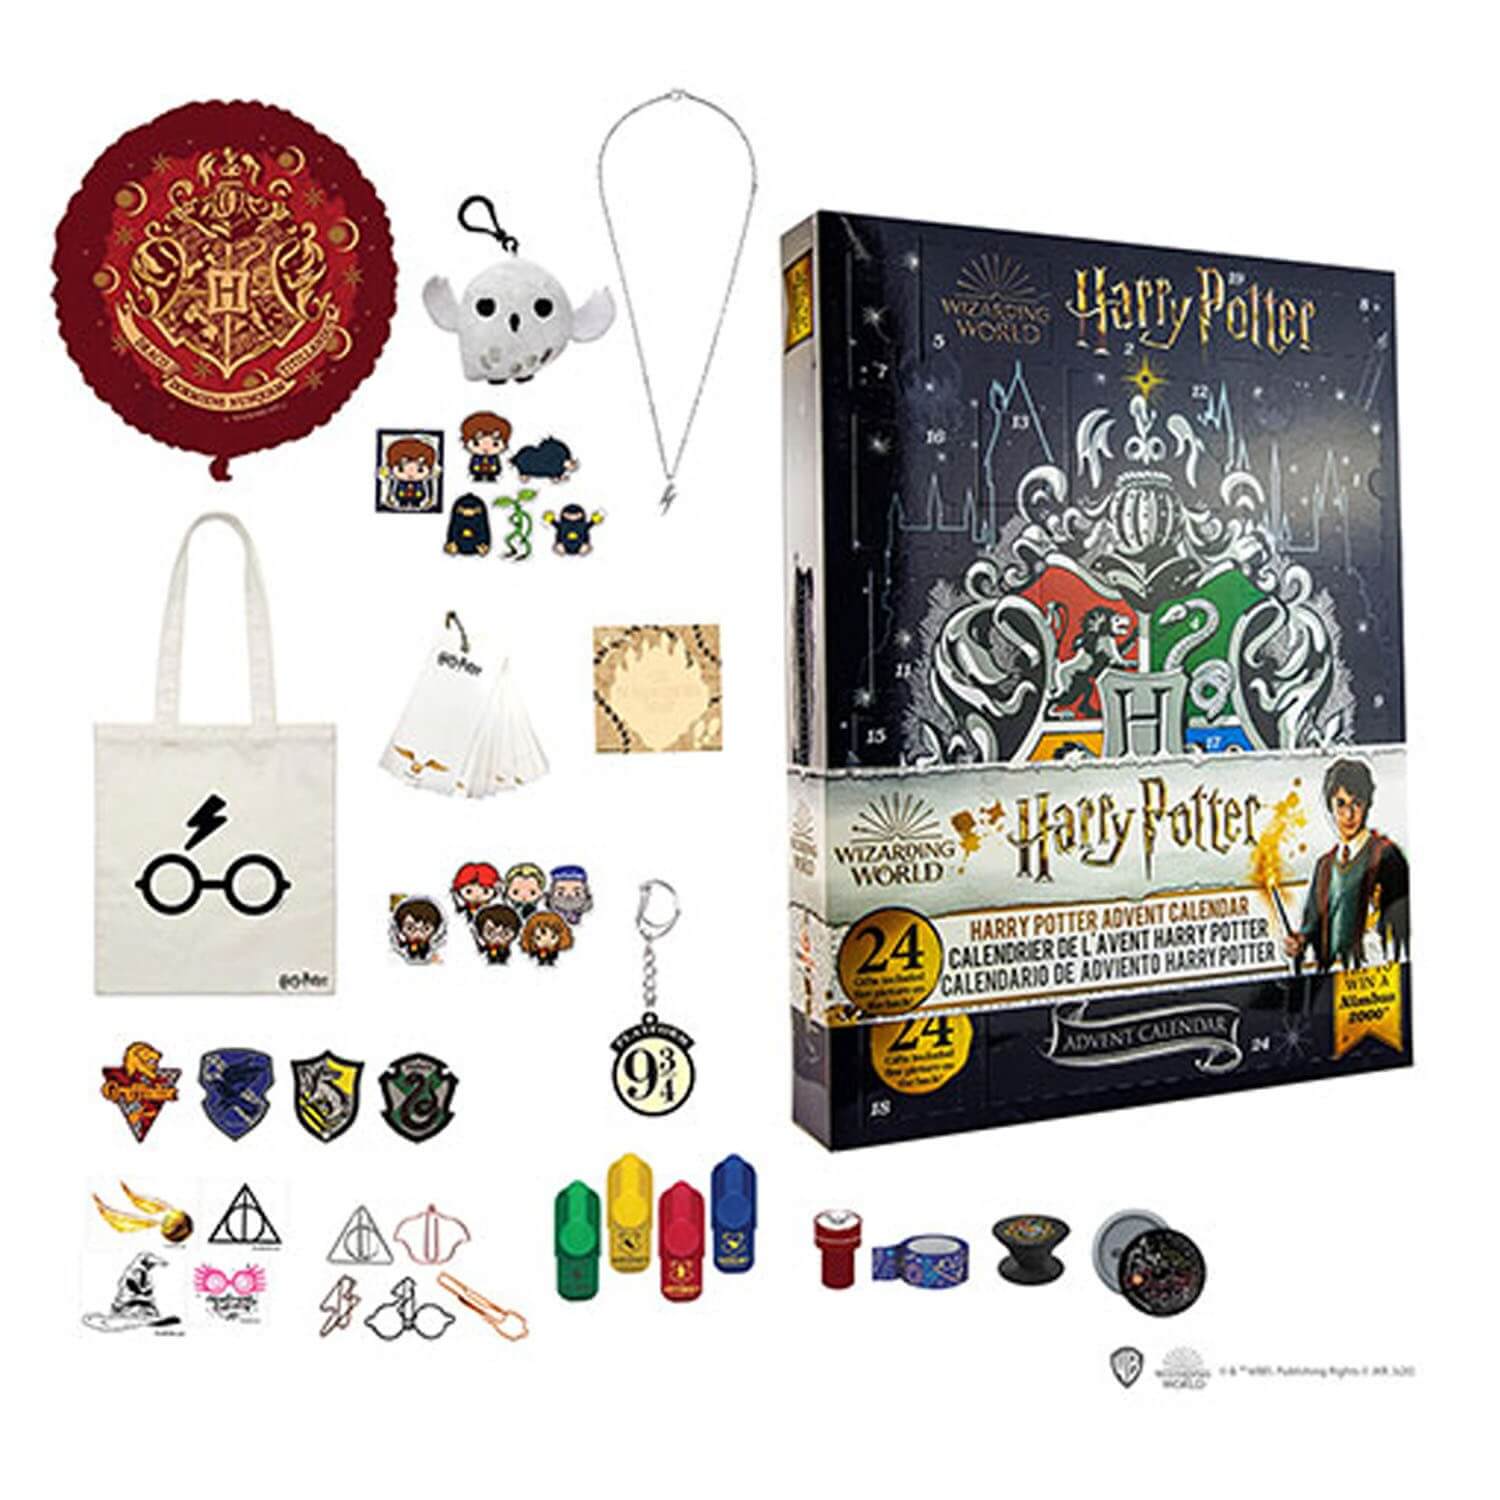 Calendrier de l'avent 2020 Harry Potter - Christmas in the Wizardin